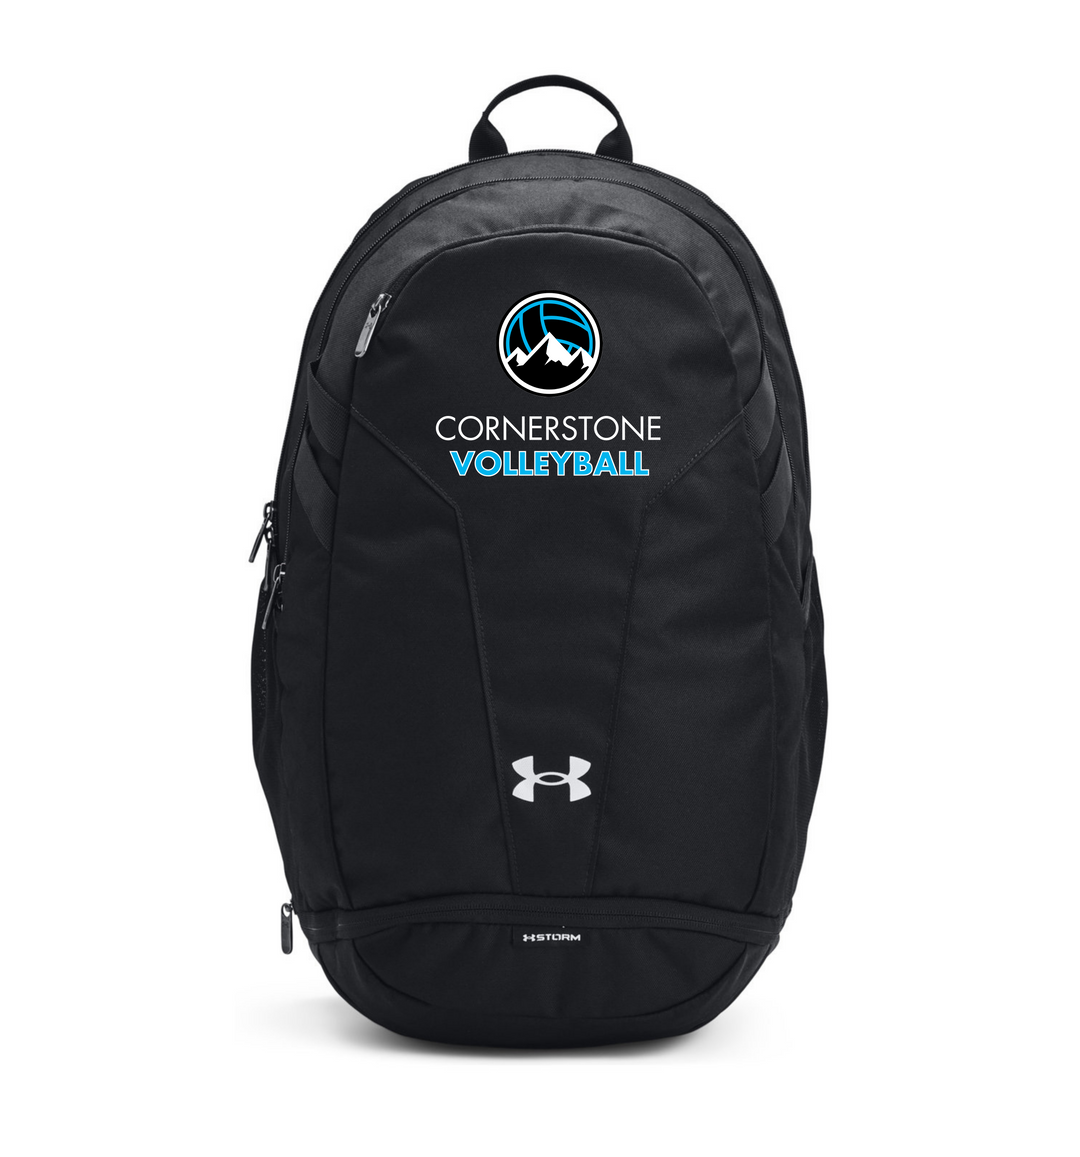 Cornerstone Volleyball Club Under Armour Backpack